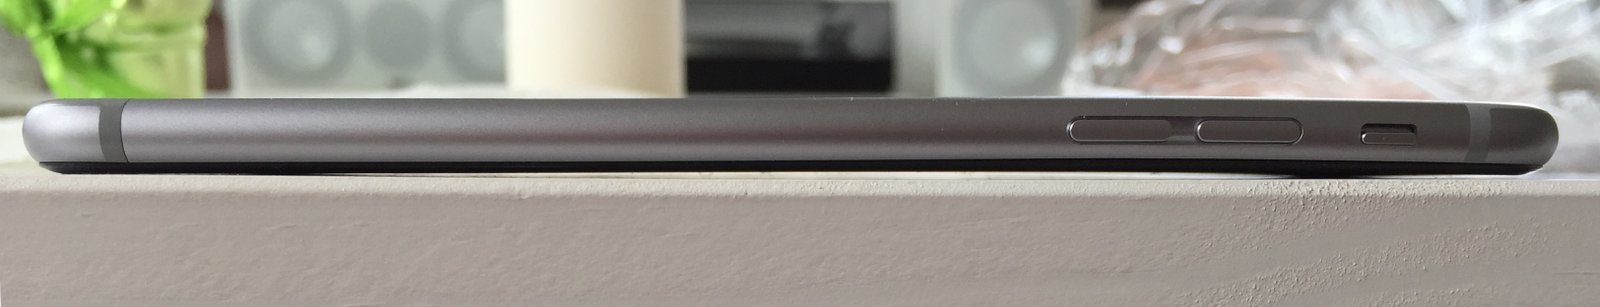 Bending problem in iPhone 6 and iPhone 6 Plus